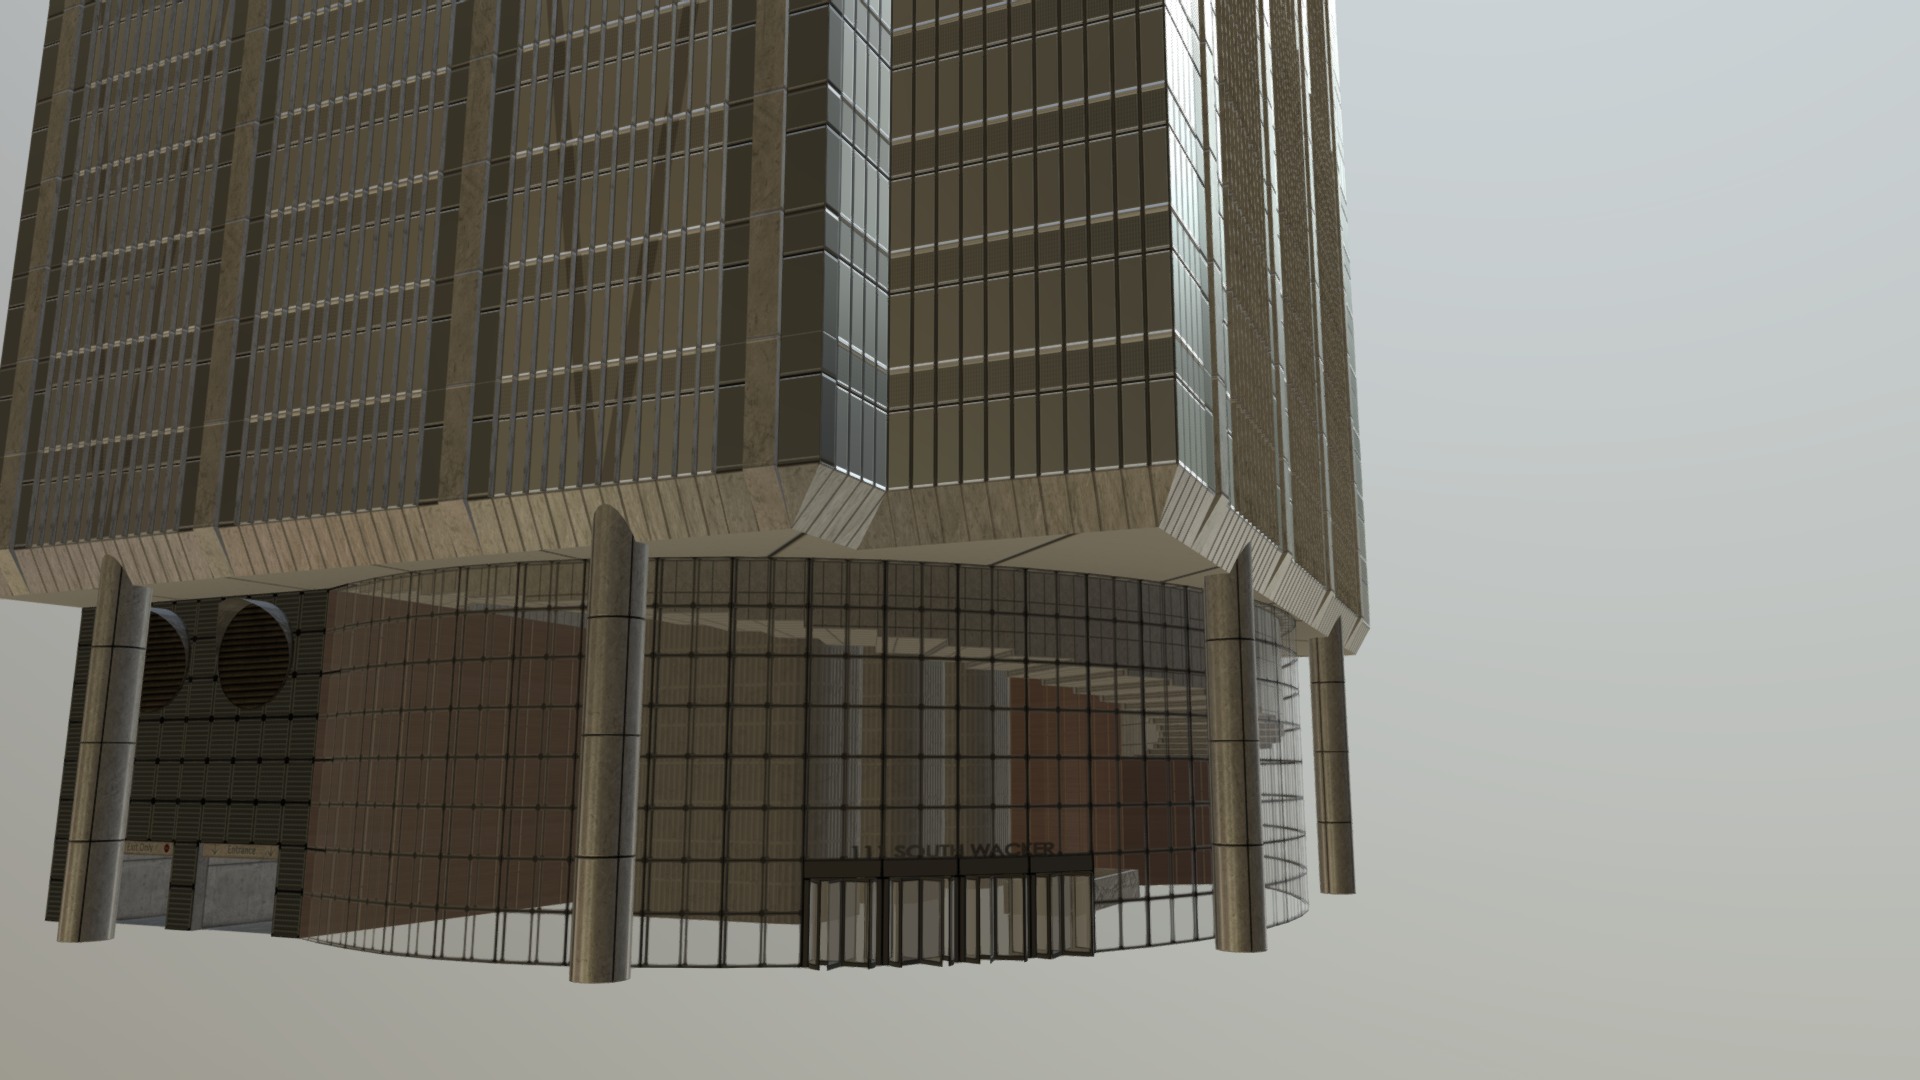 3D model 111 South Wacker - This is a 3D model of the 111 South Wacker. The 3D model is about a building with a large metal frame.